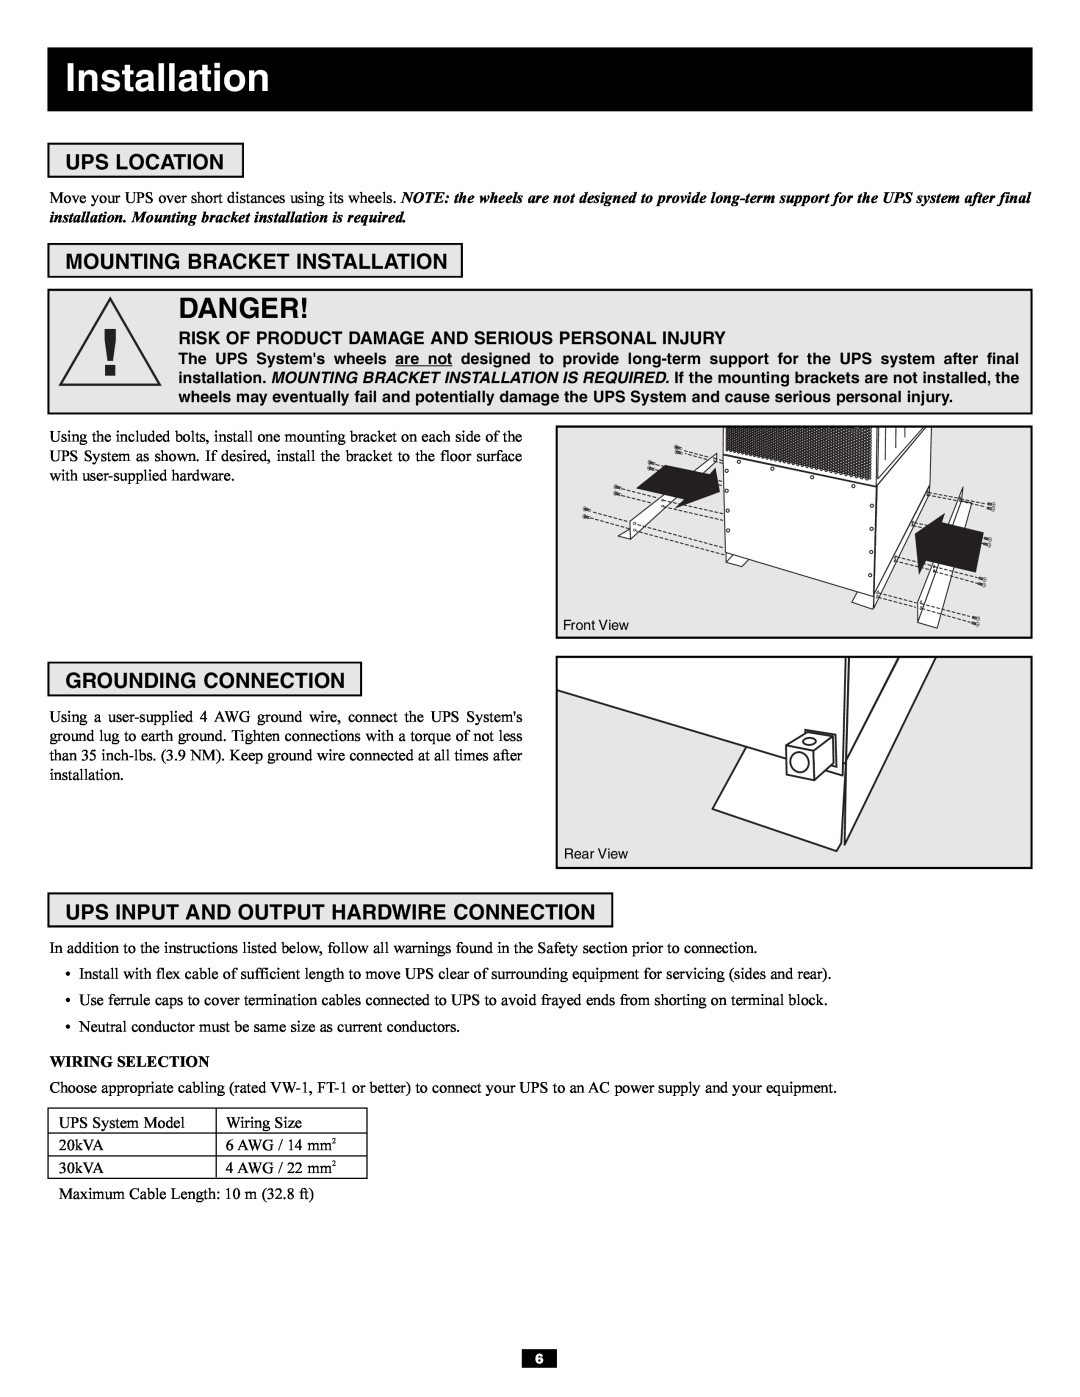 Tripp Lite Power Supply owner manual Danger, Ups Location, Mounting Bracket Installation, Grounding Connection 